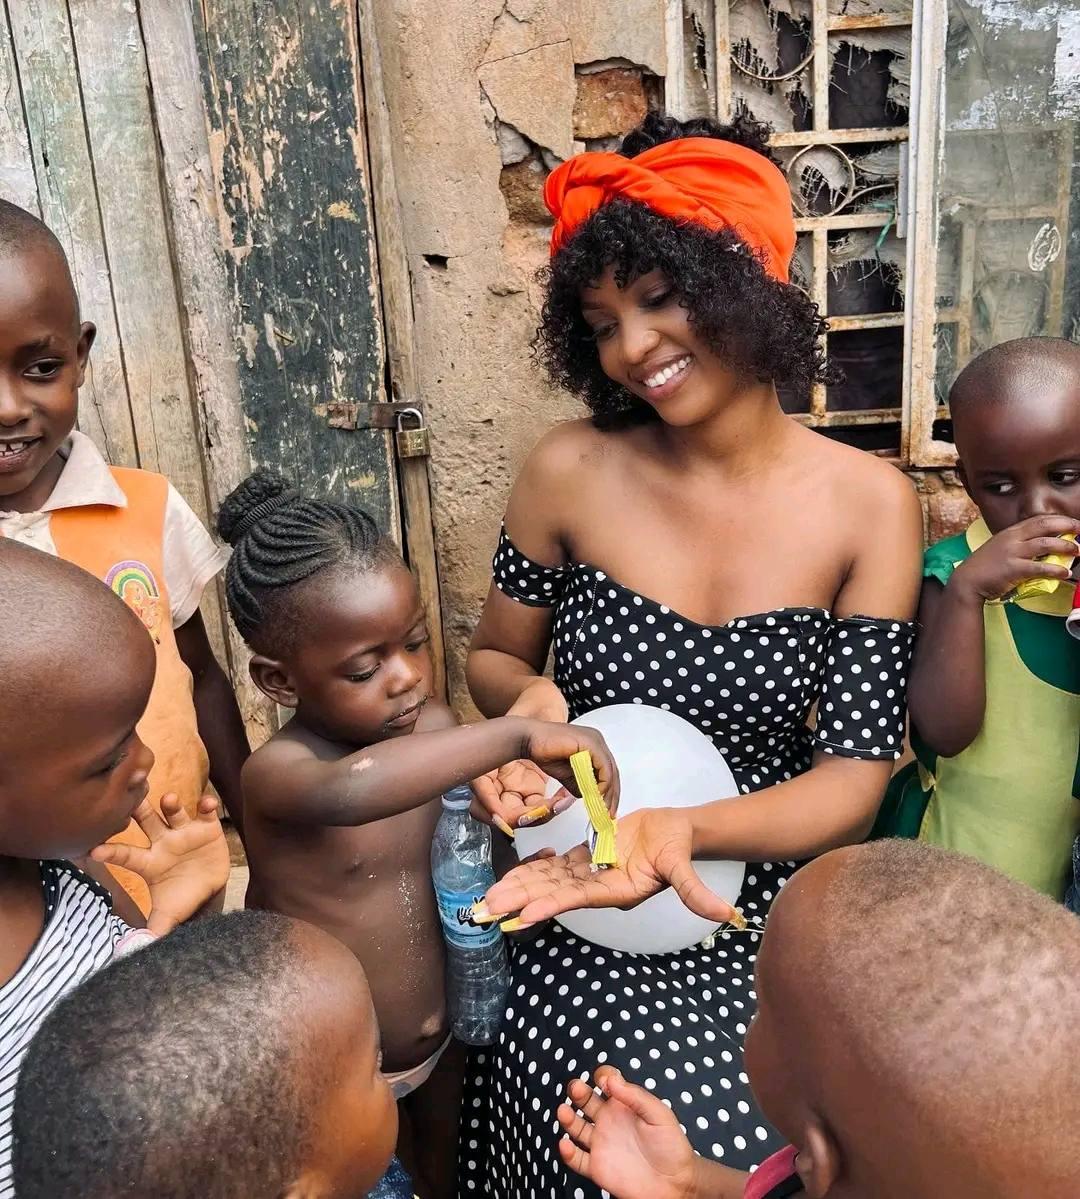 Spice Diana brings happiness to kids in the ghetto